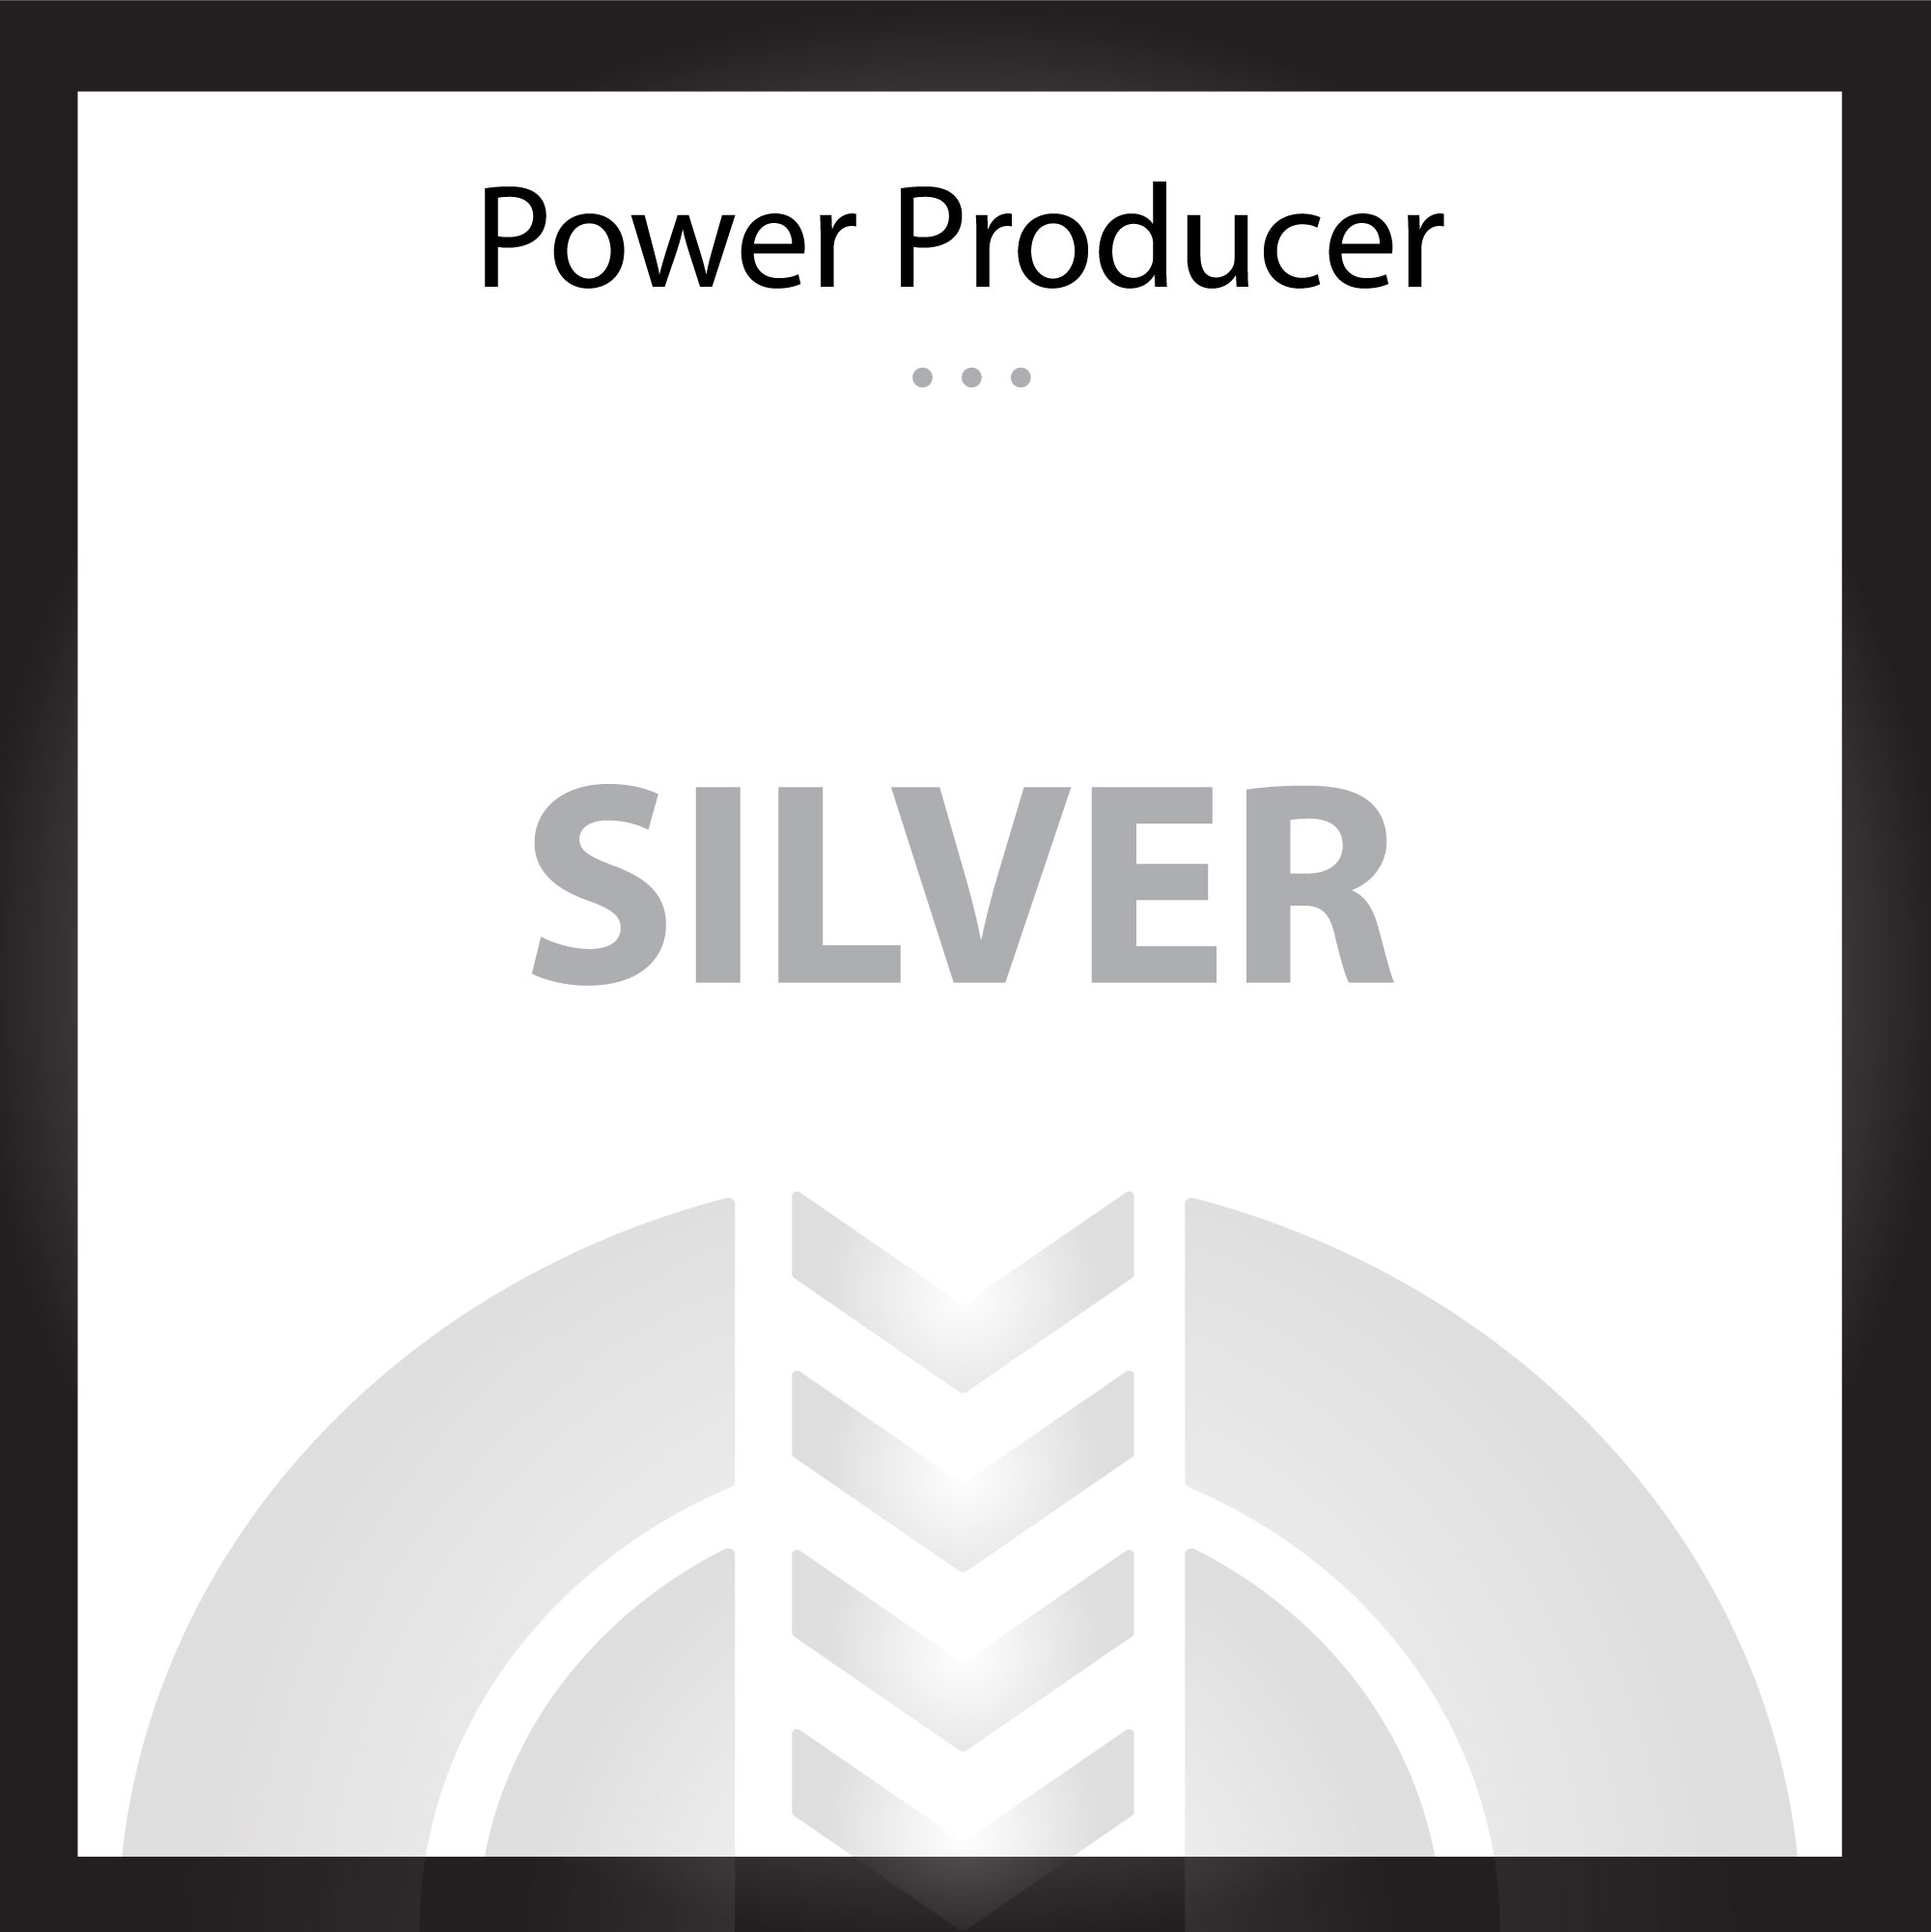 Power Producer Silver